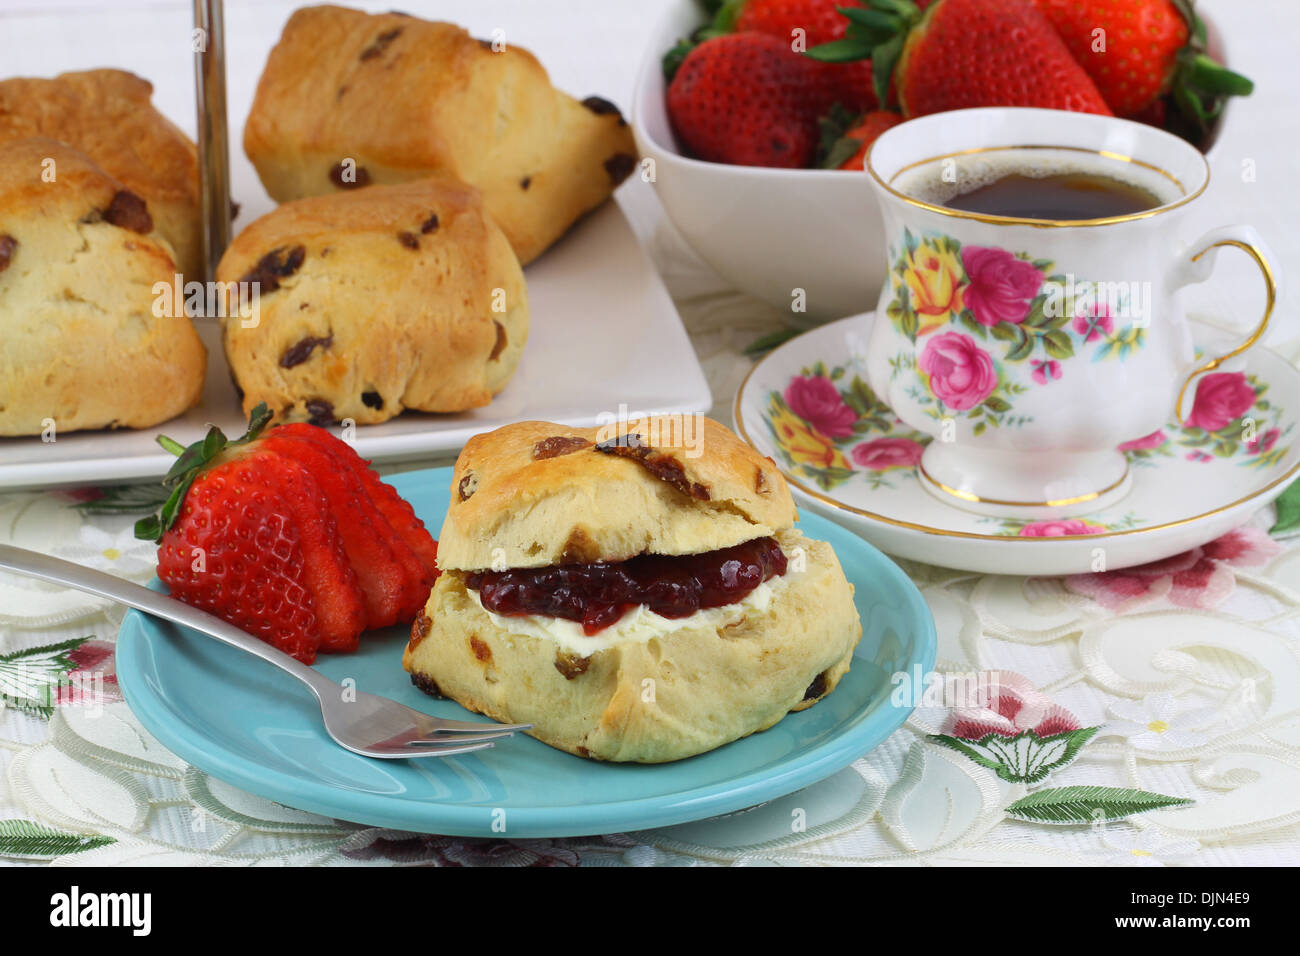 Scone with jam and clotted cream Stock Photo